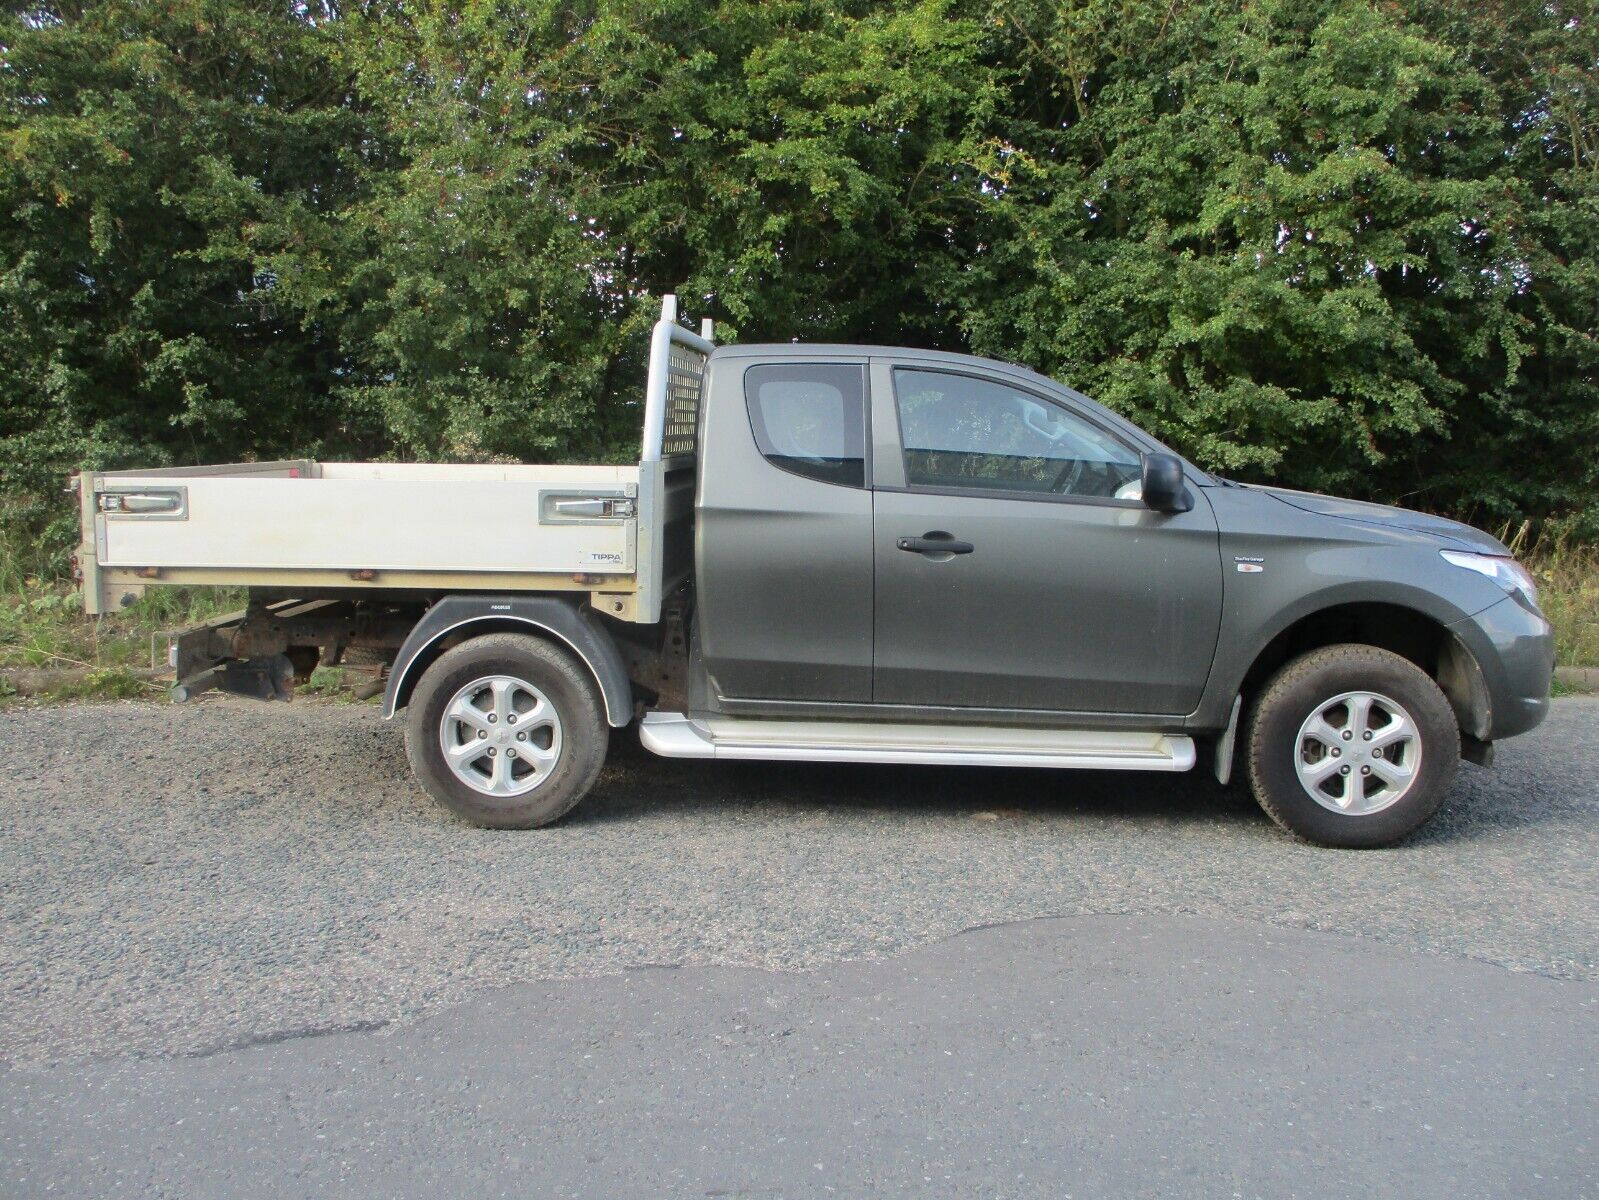 Bid on 40K MILES ONLY : MITSUBISHI L200 KINGCAB 4X4 TIPPER 2.5 DI-D- Buy &amp; Sell on Auction with EAMA Group